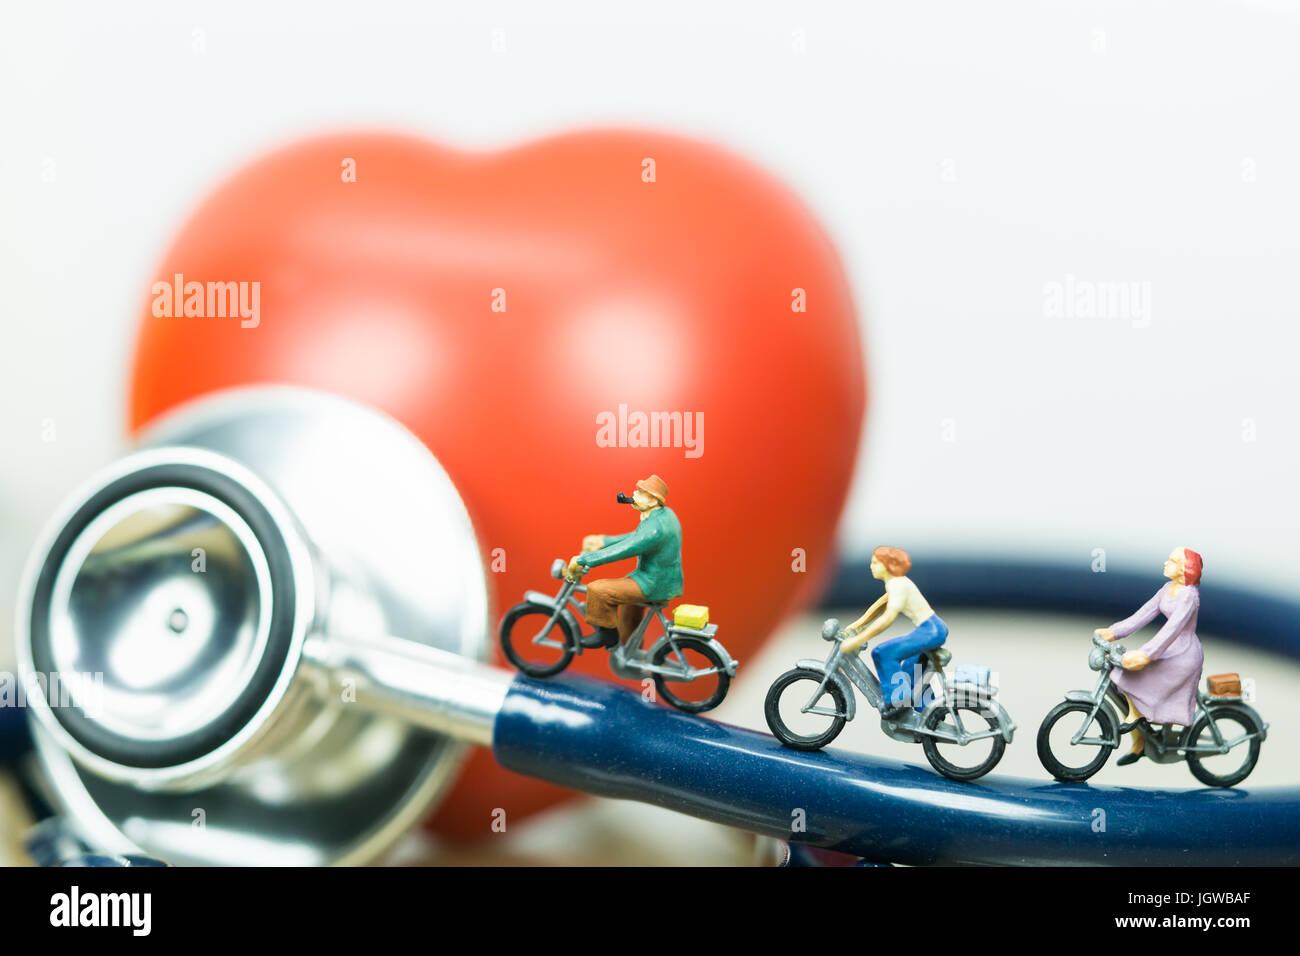 Health and travel insurance, miniature people: small figures riding  on stethoscope and red heart. Business, health care, and traveling concept. Stock Photo